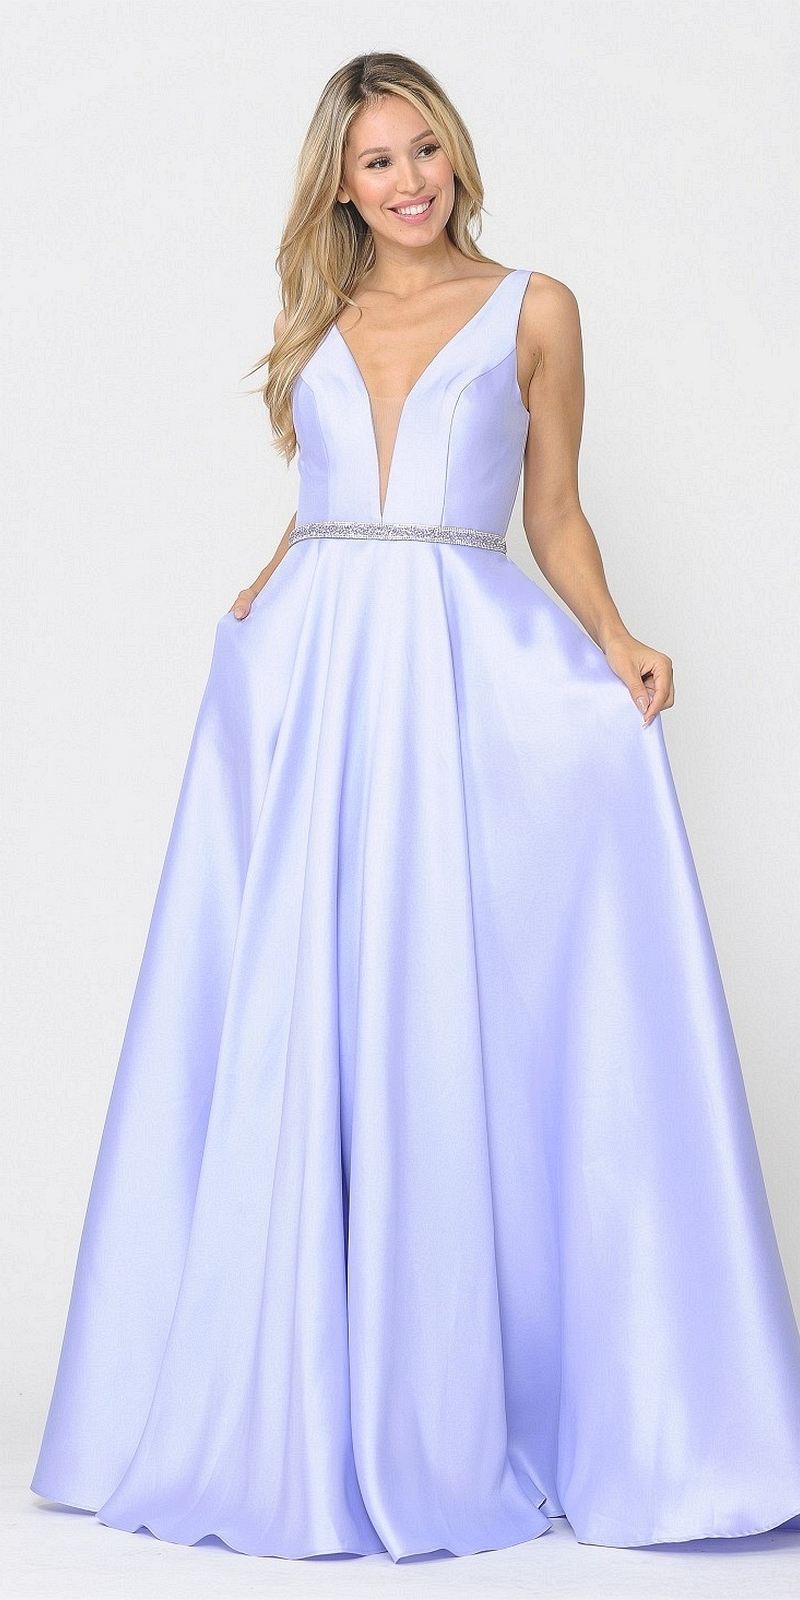 Poly USA 8682 V-Neck and Back Lilac Long Prom Dress with Pockets